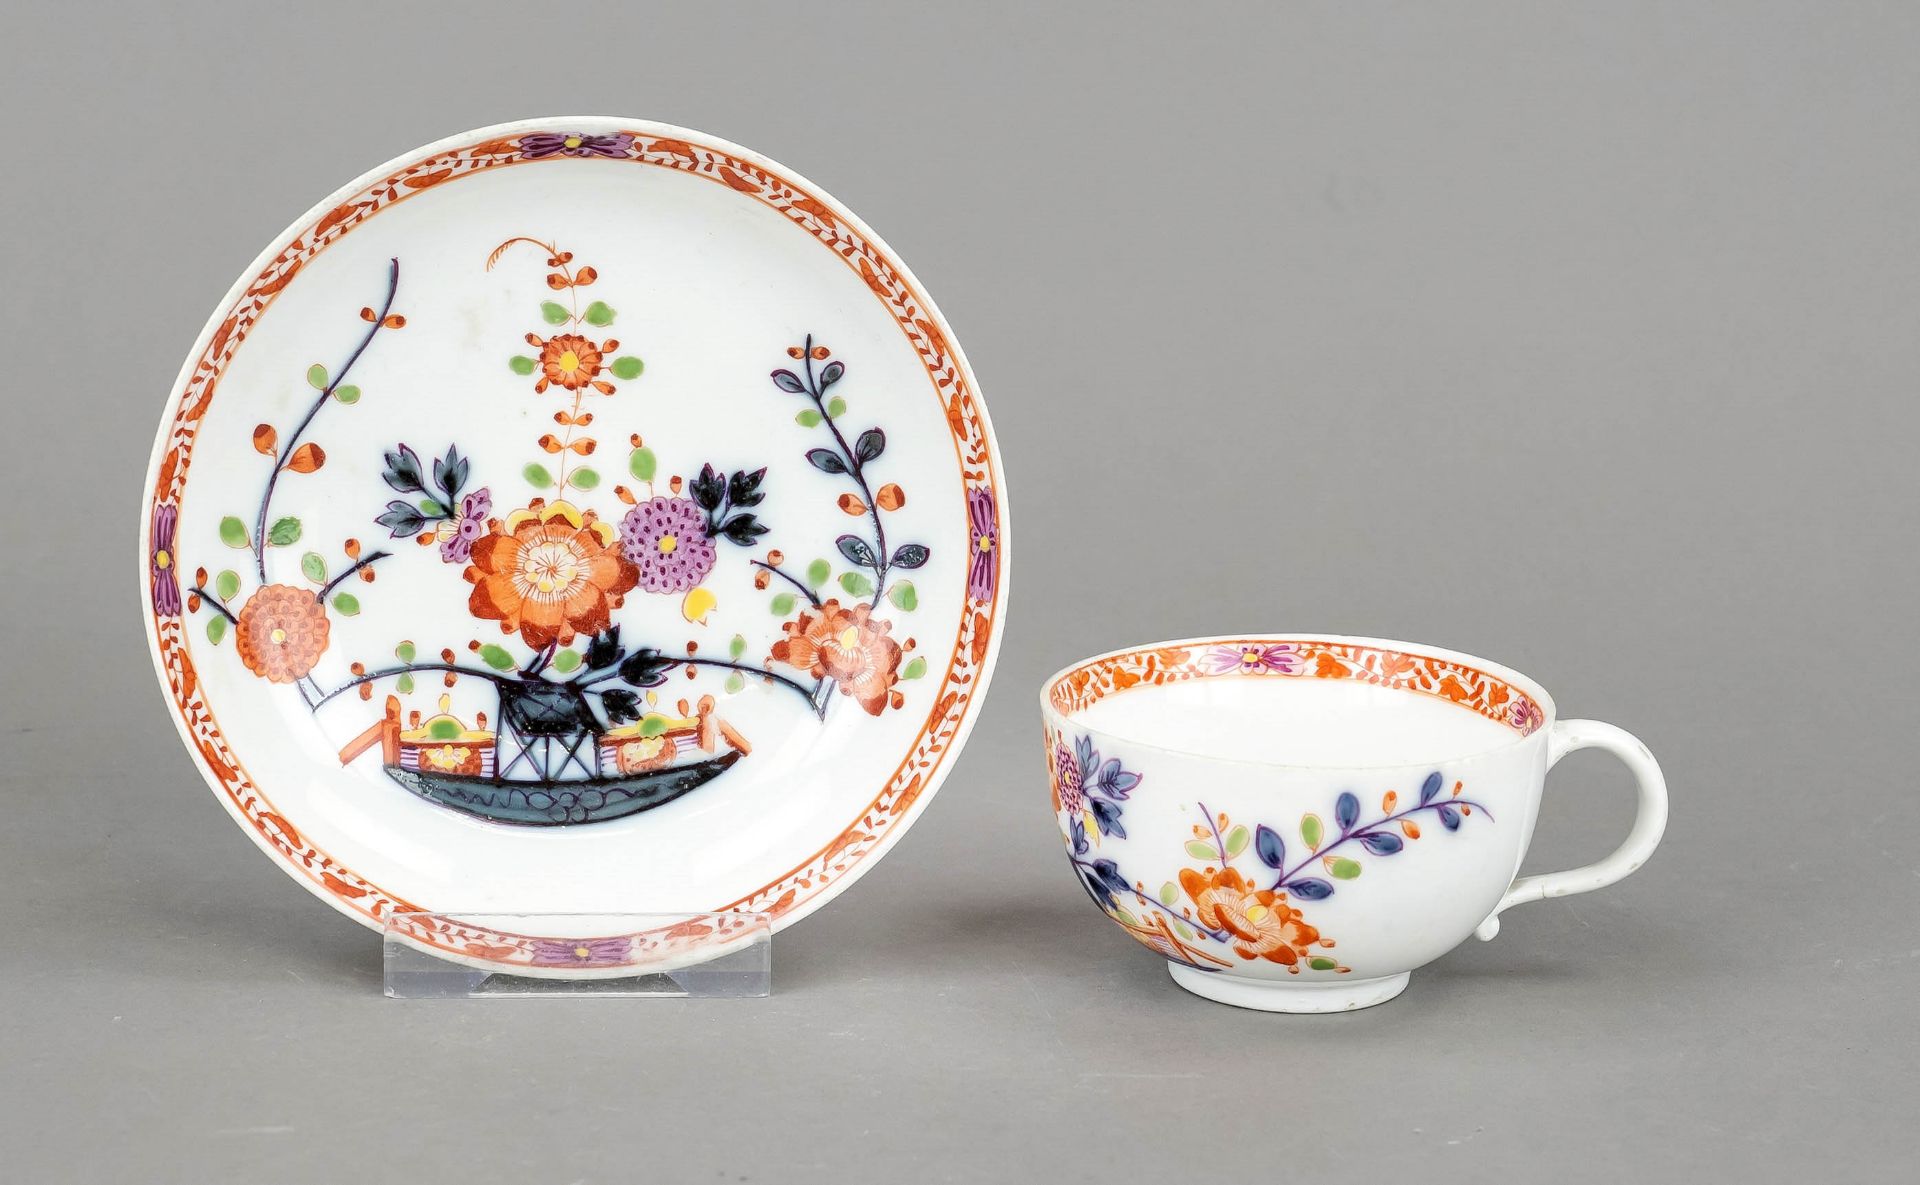 Cup with saucer, Meissen, Marcolini mark 1774-1817, semicircular shape with ear handle, polychrome